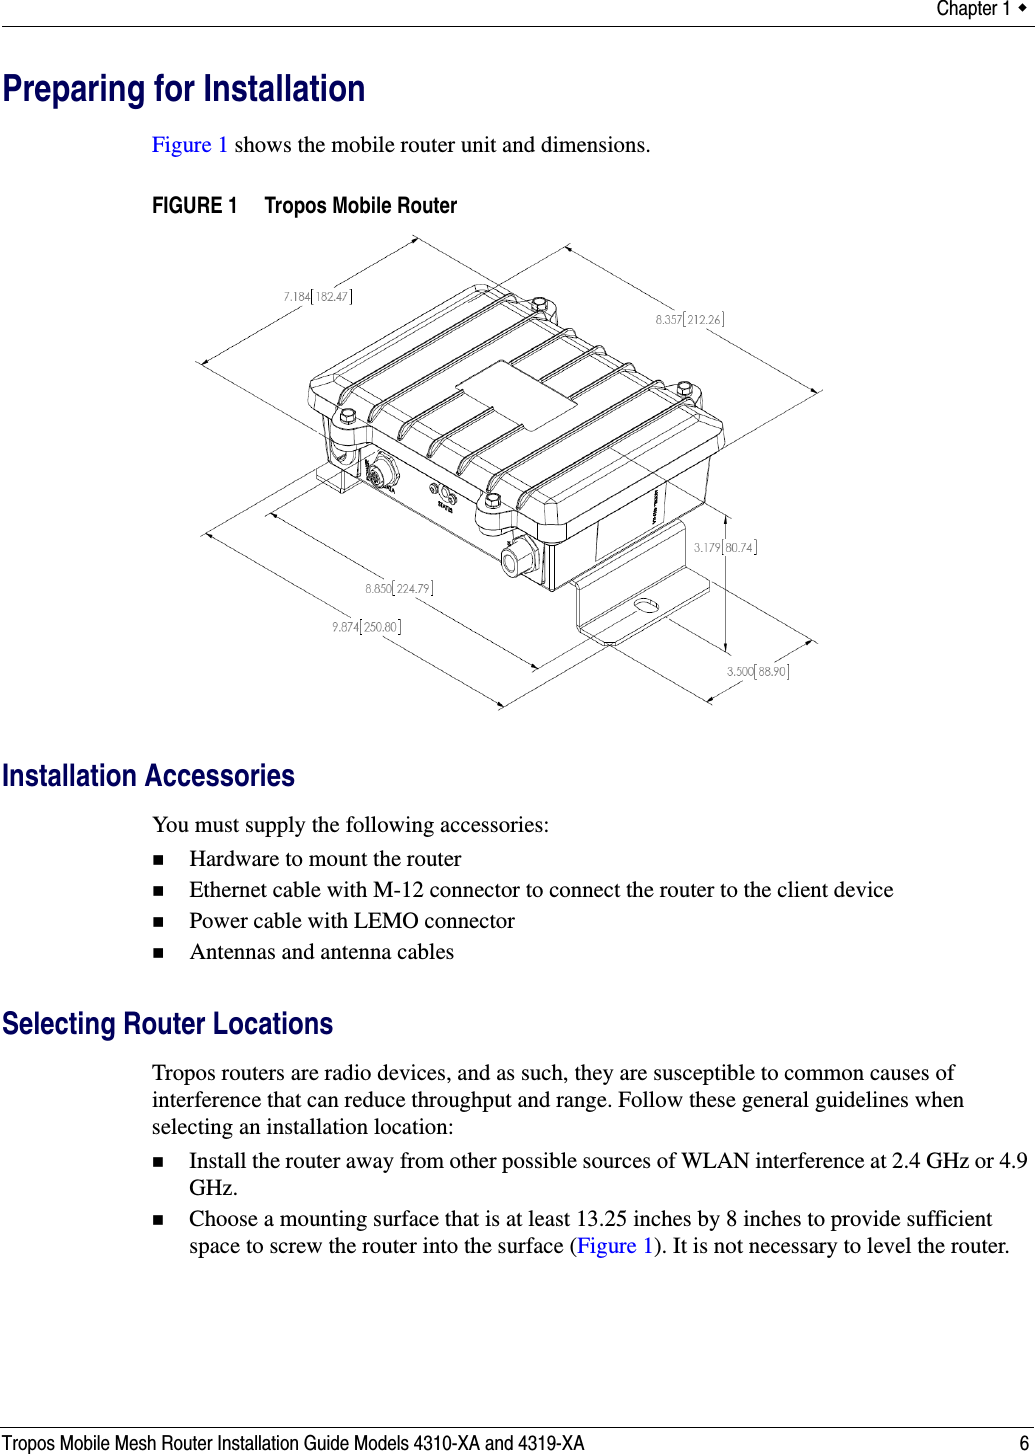 Chapter 1  Tropos Mobile Mesh Router Installation Guide Models 4310-XA and 4319-XA 6Preparing for InstallationFigure 1 shows the mobile router unit and dimensions.FIGURE 1   Tropos Mobile RouterInstallation AccessoriesYou must supply the following accessories:Hardware to mount the routerEthernet cable with M-12 connector to connect the router to the client devicePower cable with LEMO connectorAntennas and antenna cablesSelecting Router LocationsTropos routers are radio devices, and as such, they are susceptible to common causes of interference that can reduce throughput and range. Follow these general guidelines when selecting an installation location:Install the router away from other possible sources of WLAN interference at 2.4 GHz or 4.9 GHz.Choose a mounting surface that is at least 13.25 inches by 8 inches to provide sufficient space to screw the router into the surface (Figure 1). It is not necessary to level the router.